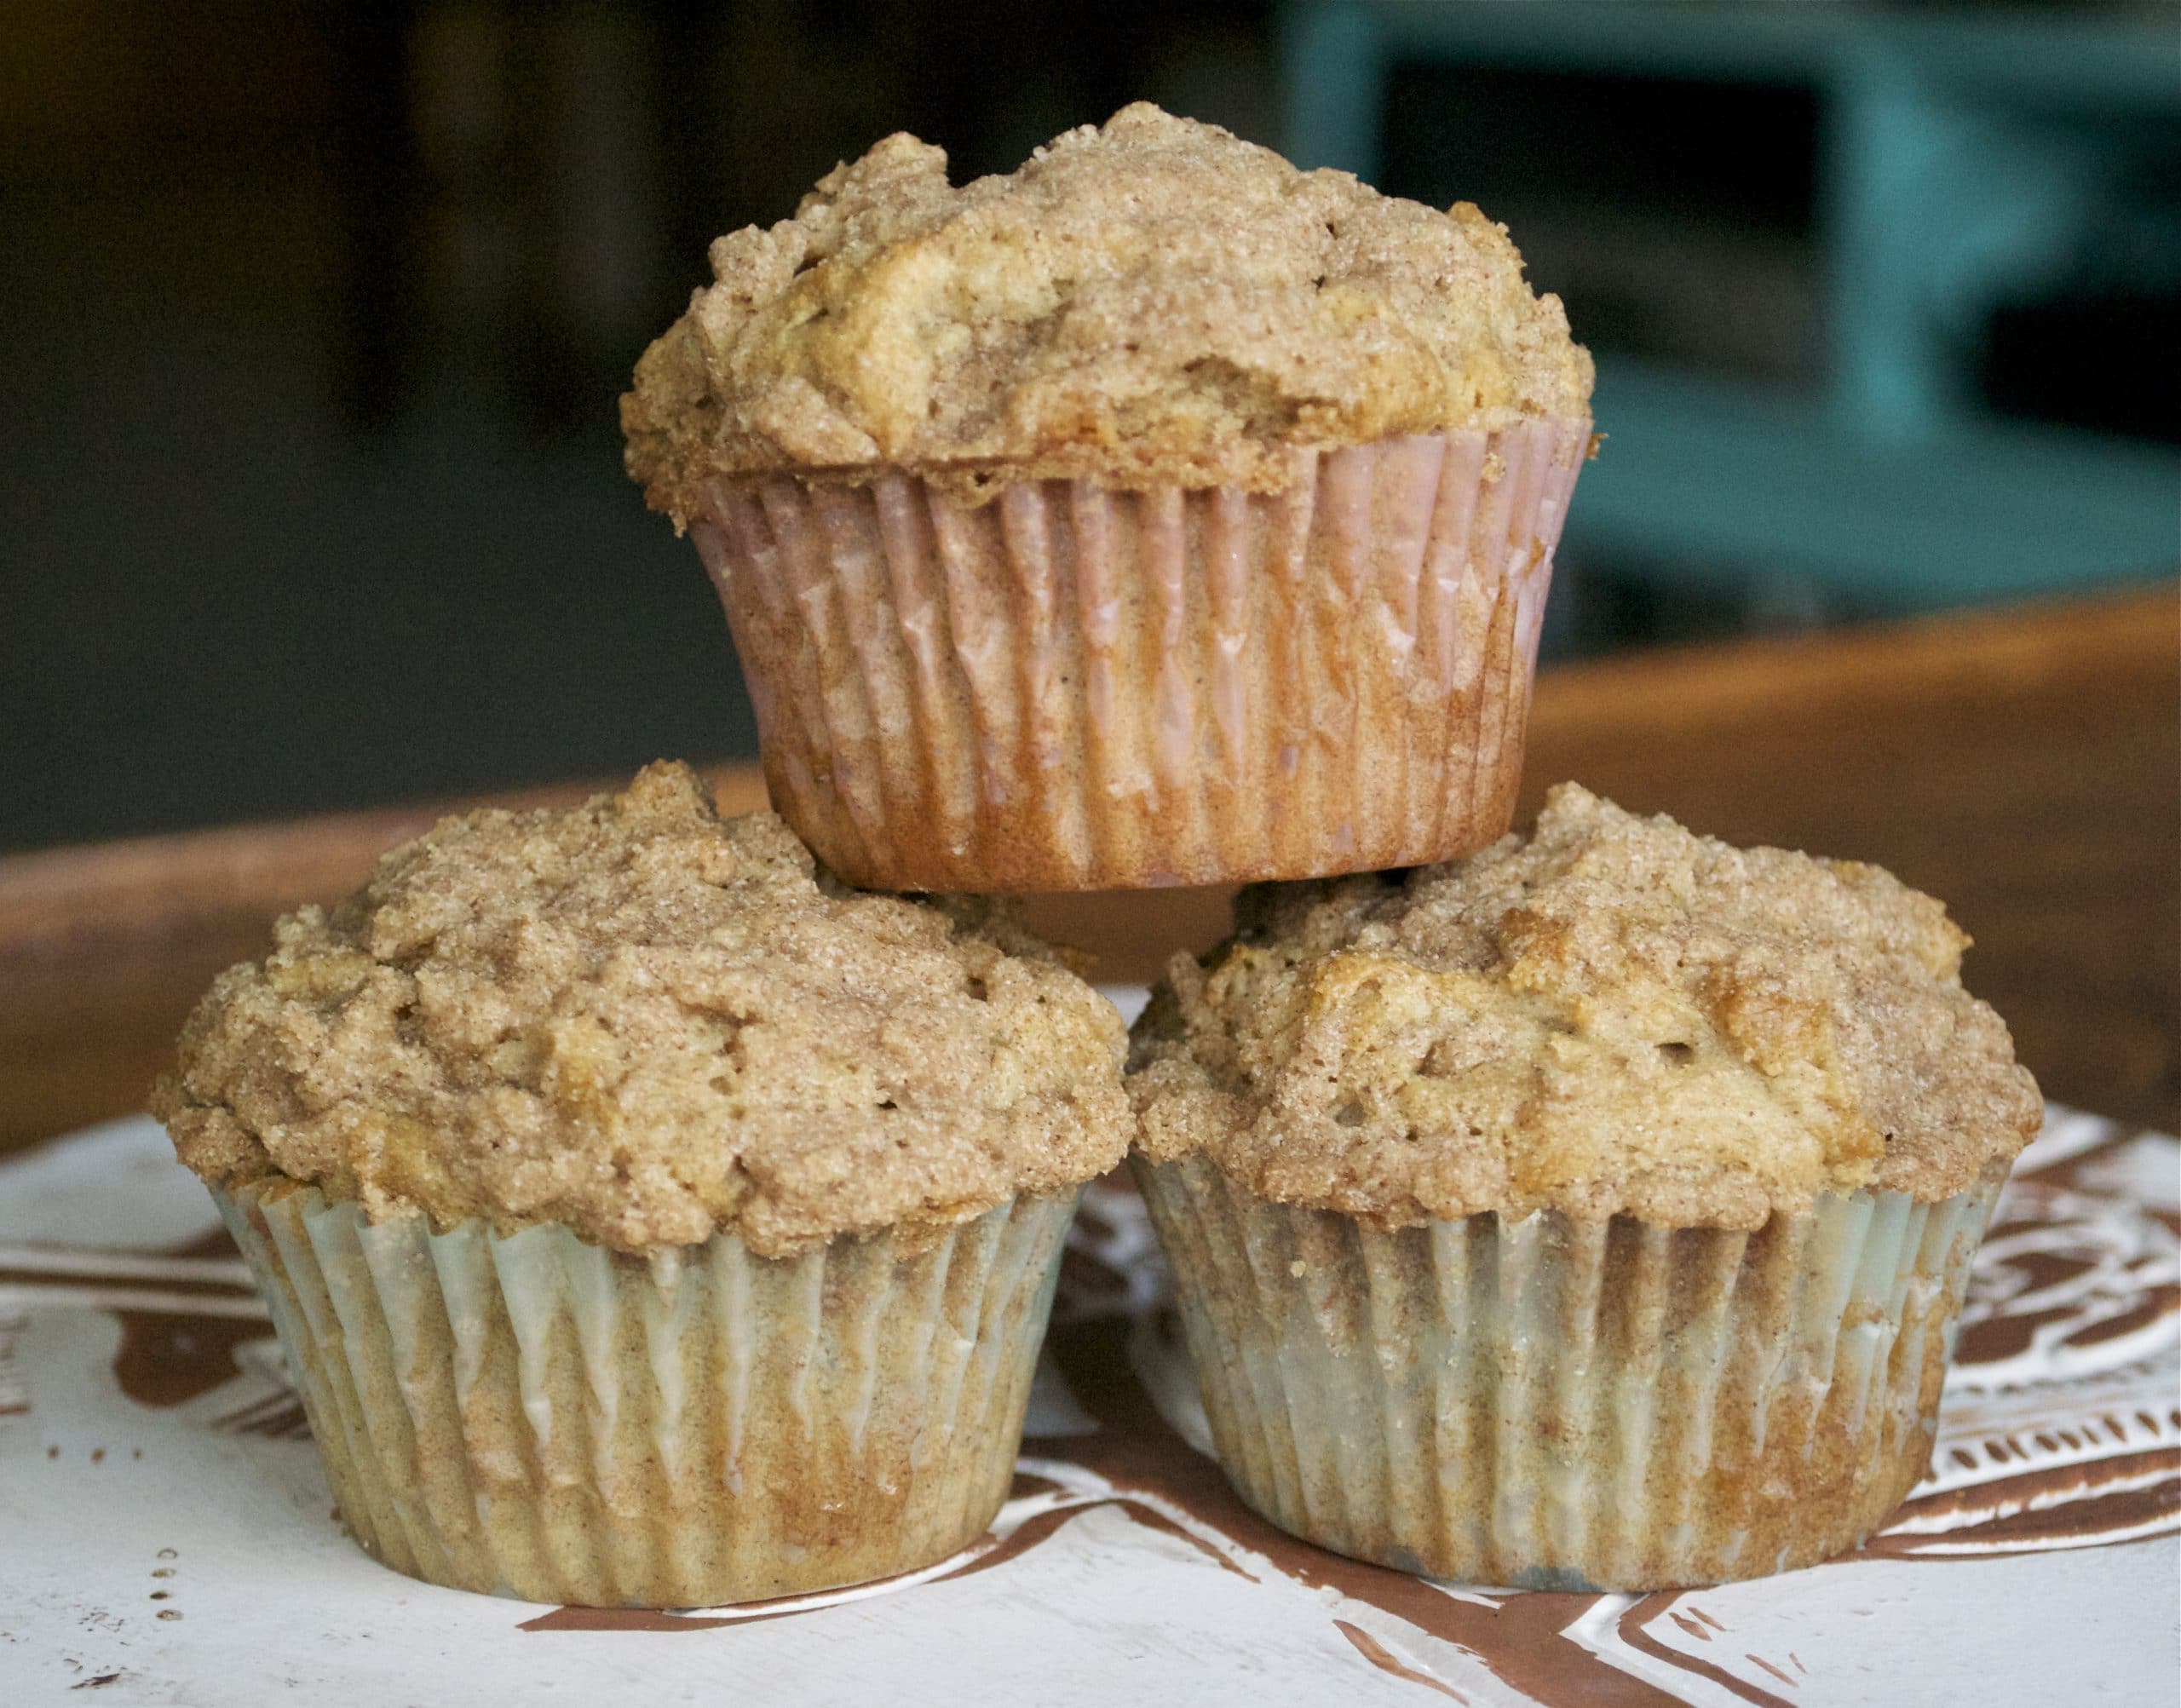 Gluten Free Cinnamon Muffins with Streusel Topping